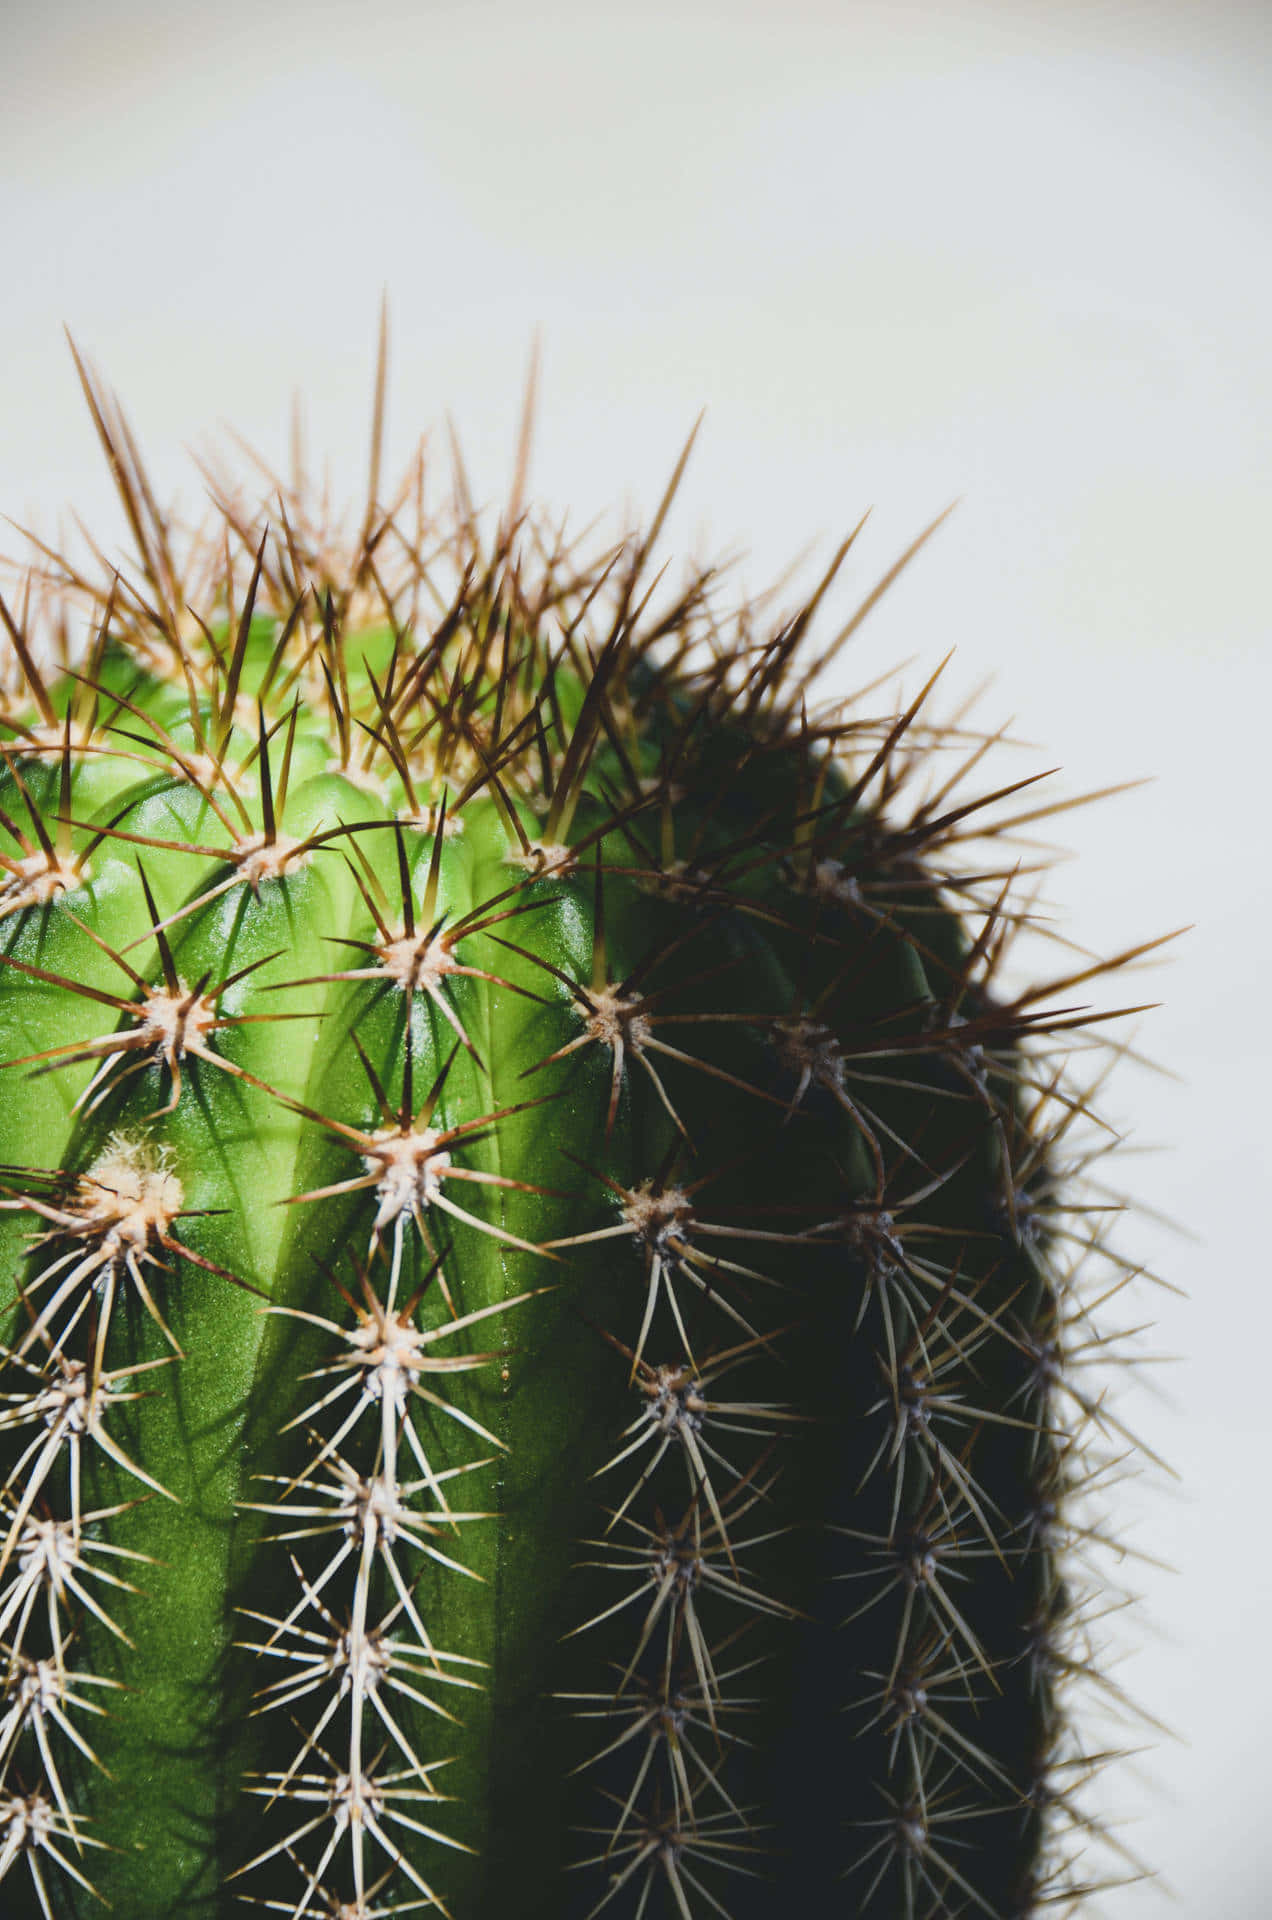 Get rid of your worries with a beautiful Cactus